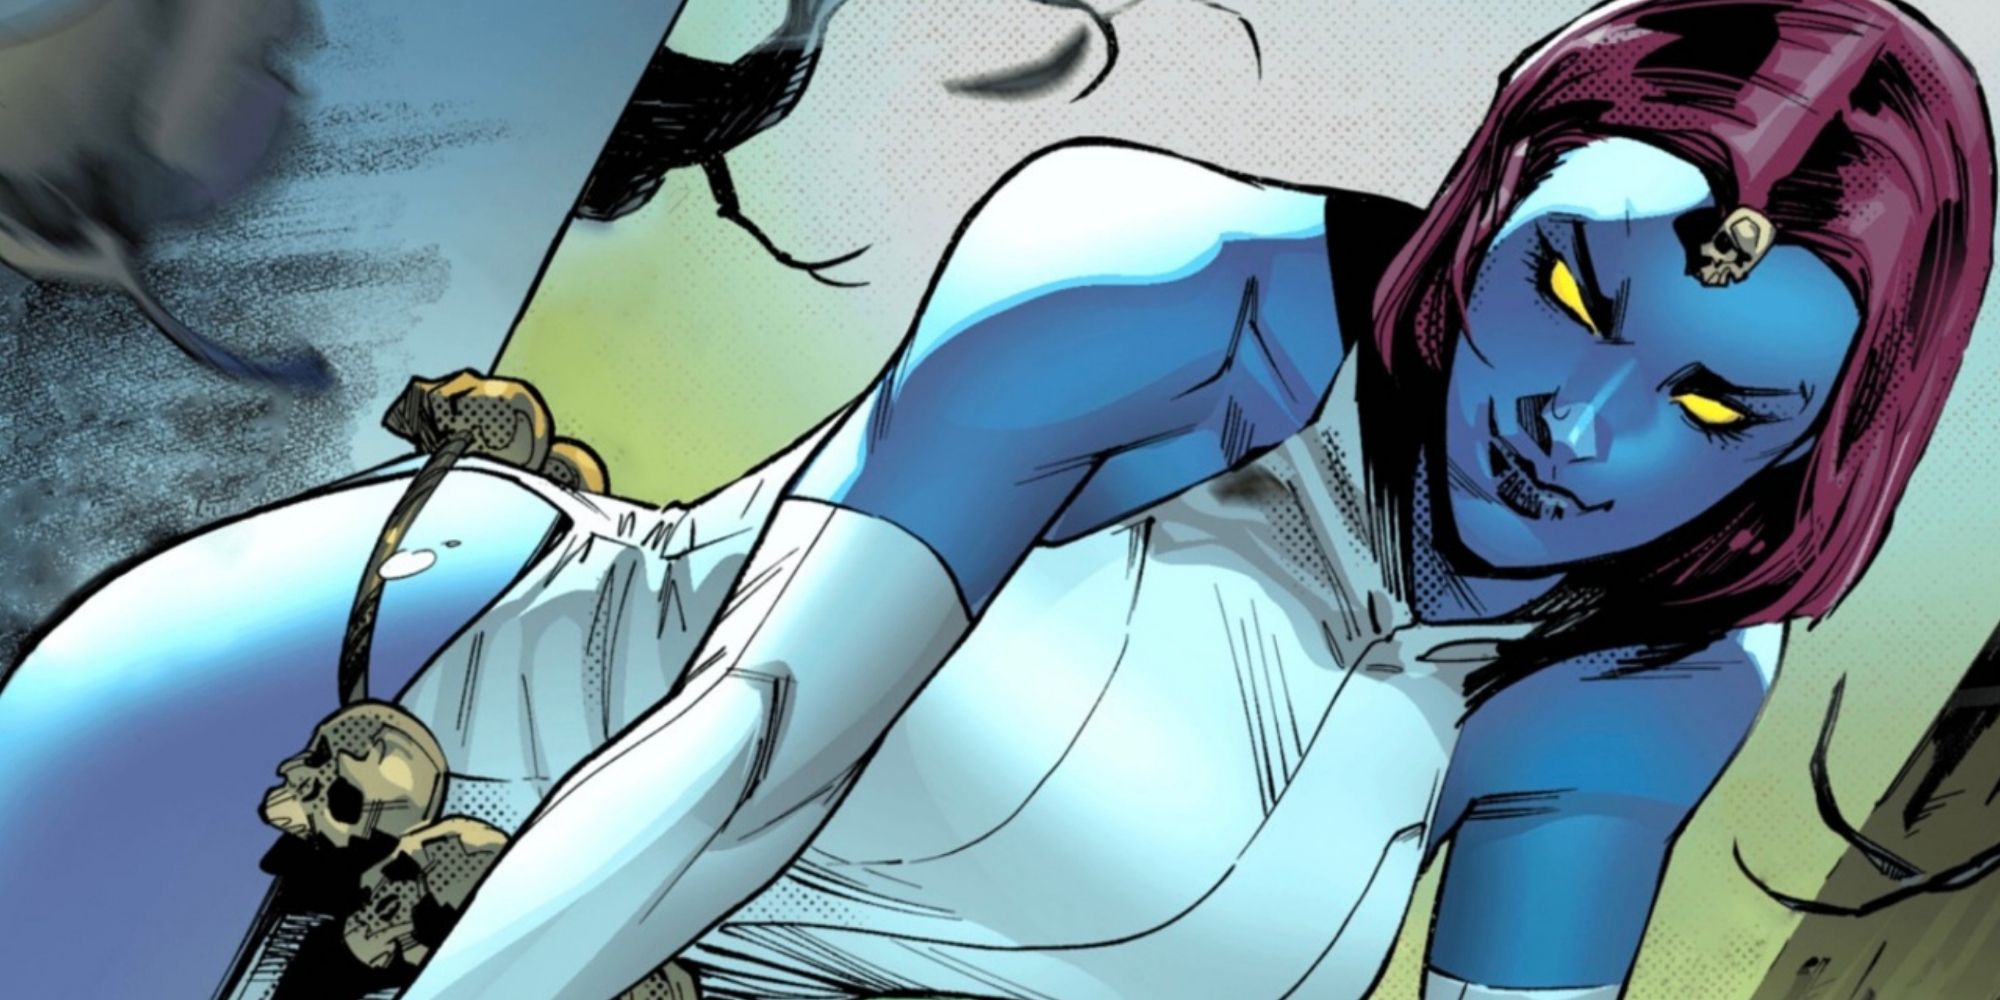 Mystique in X-Men getting up from the ground after a fight.